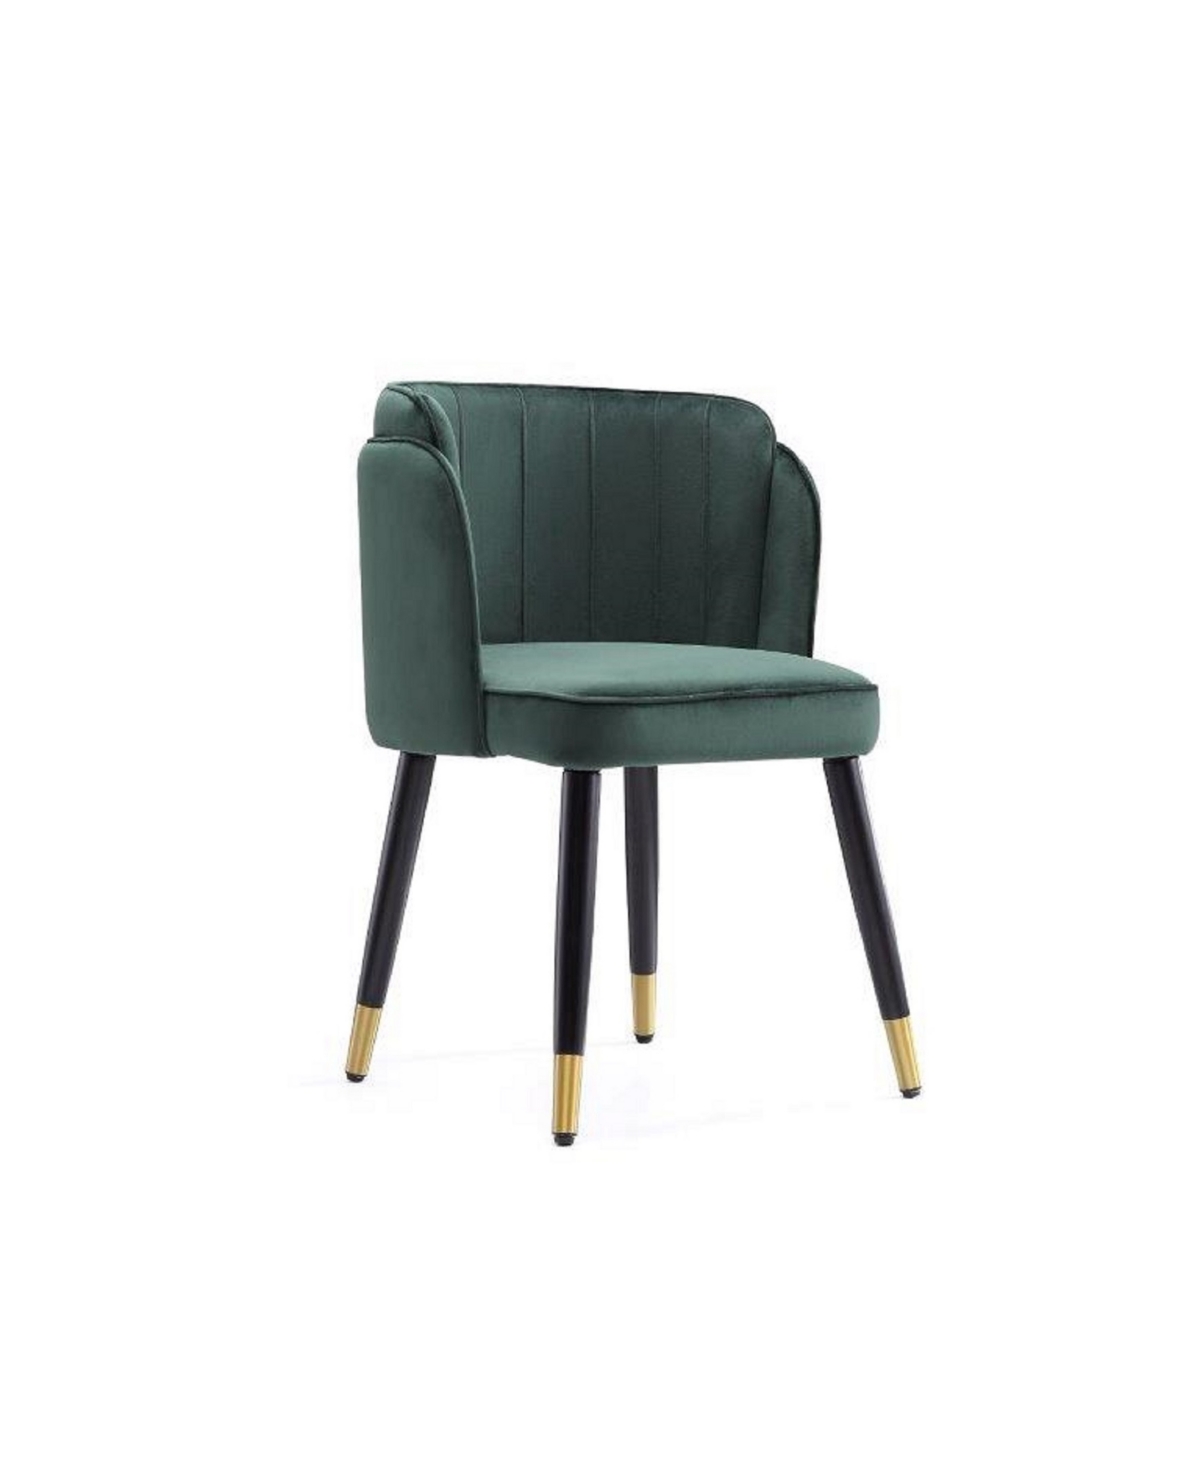 Manhattan Comfort Zephyr Dining Chair In Green And Polished Chrome